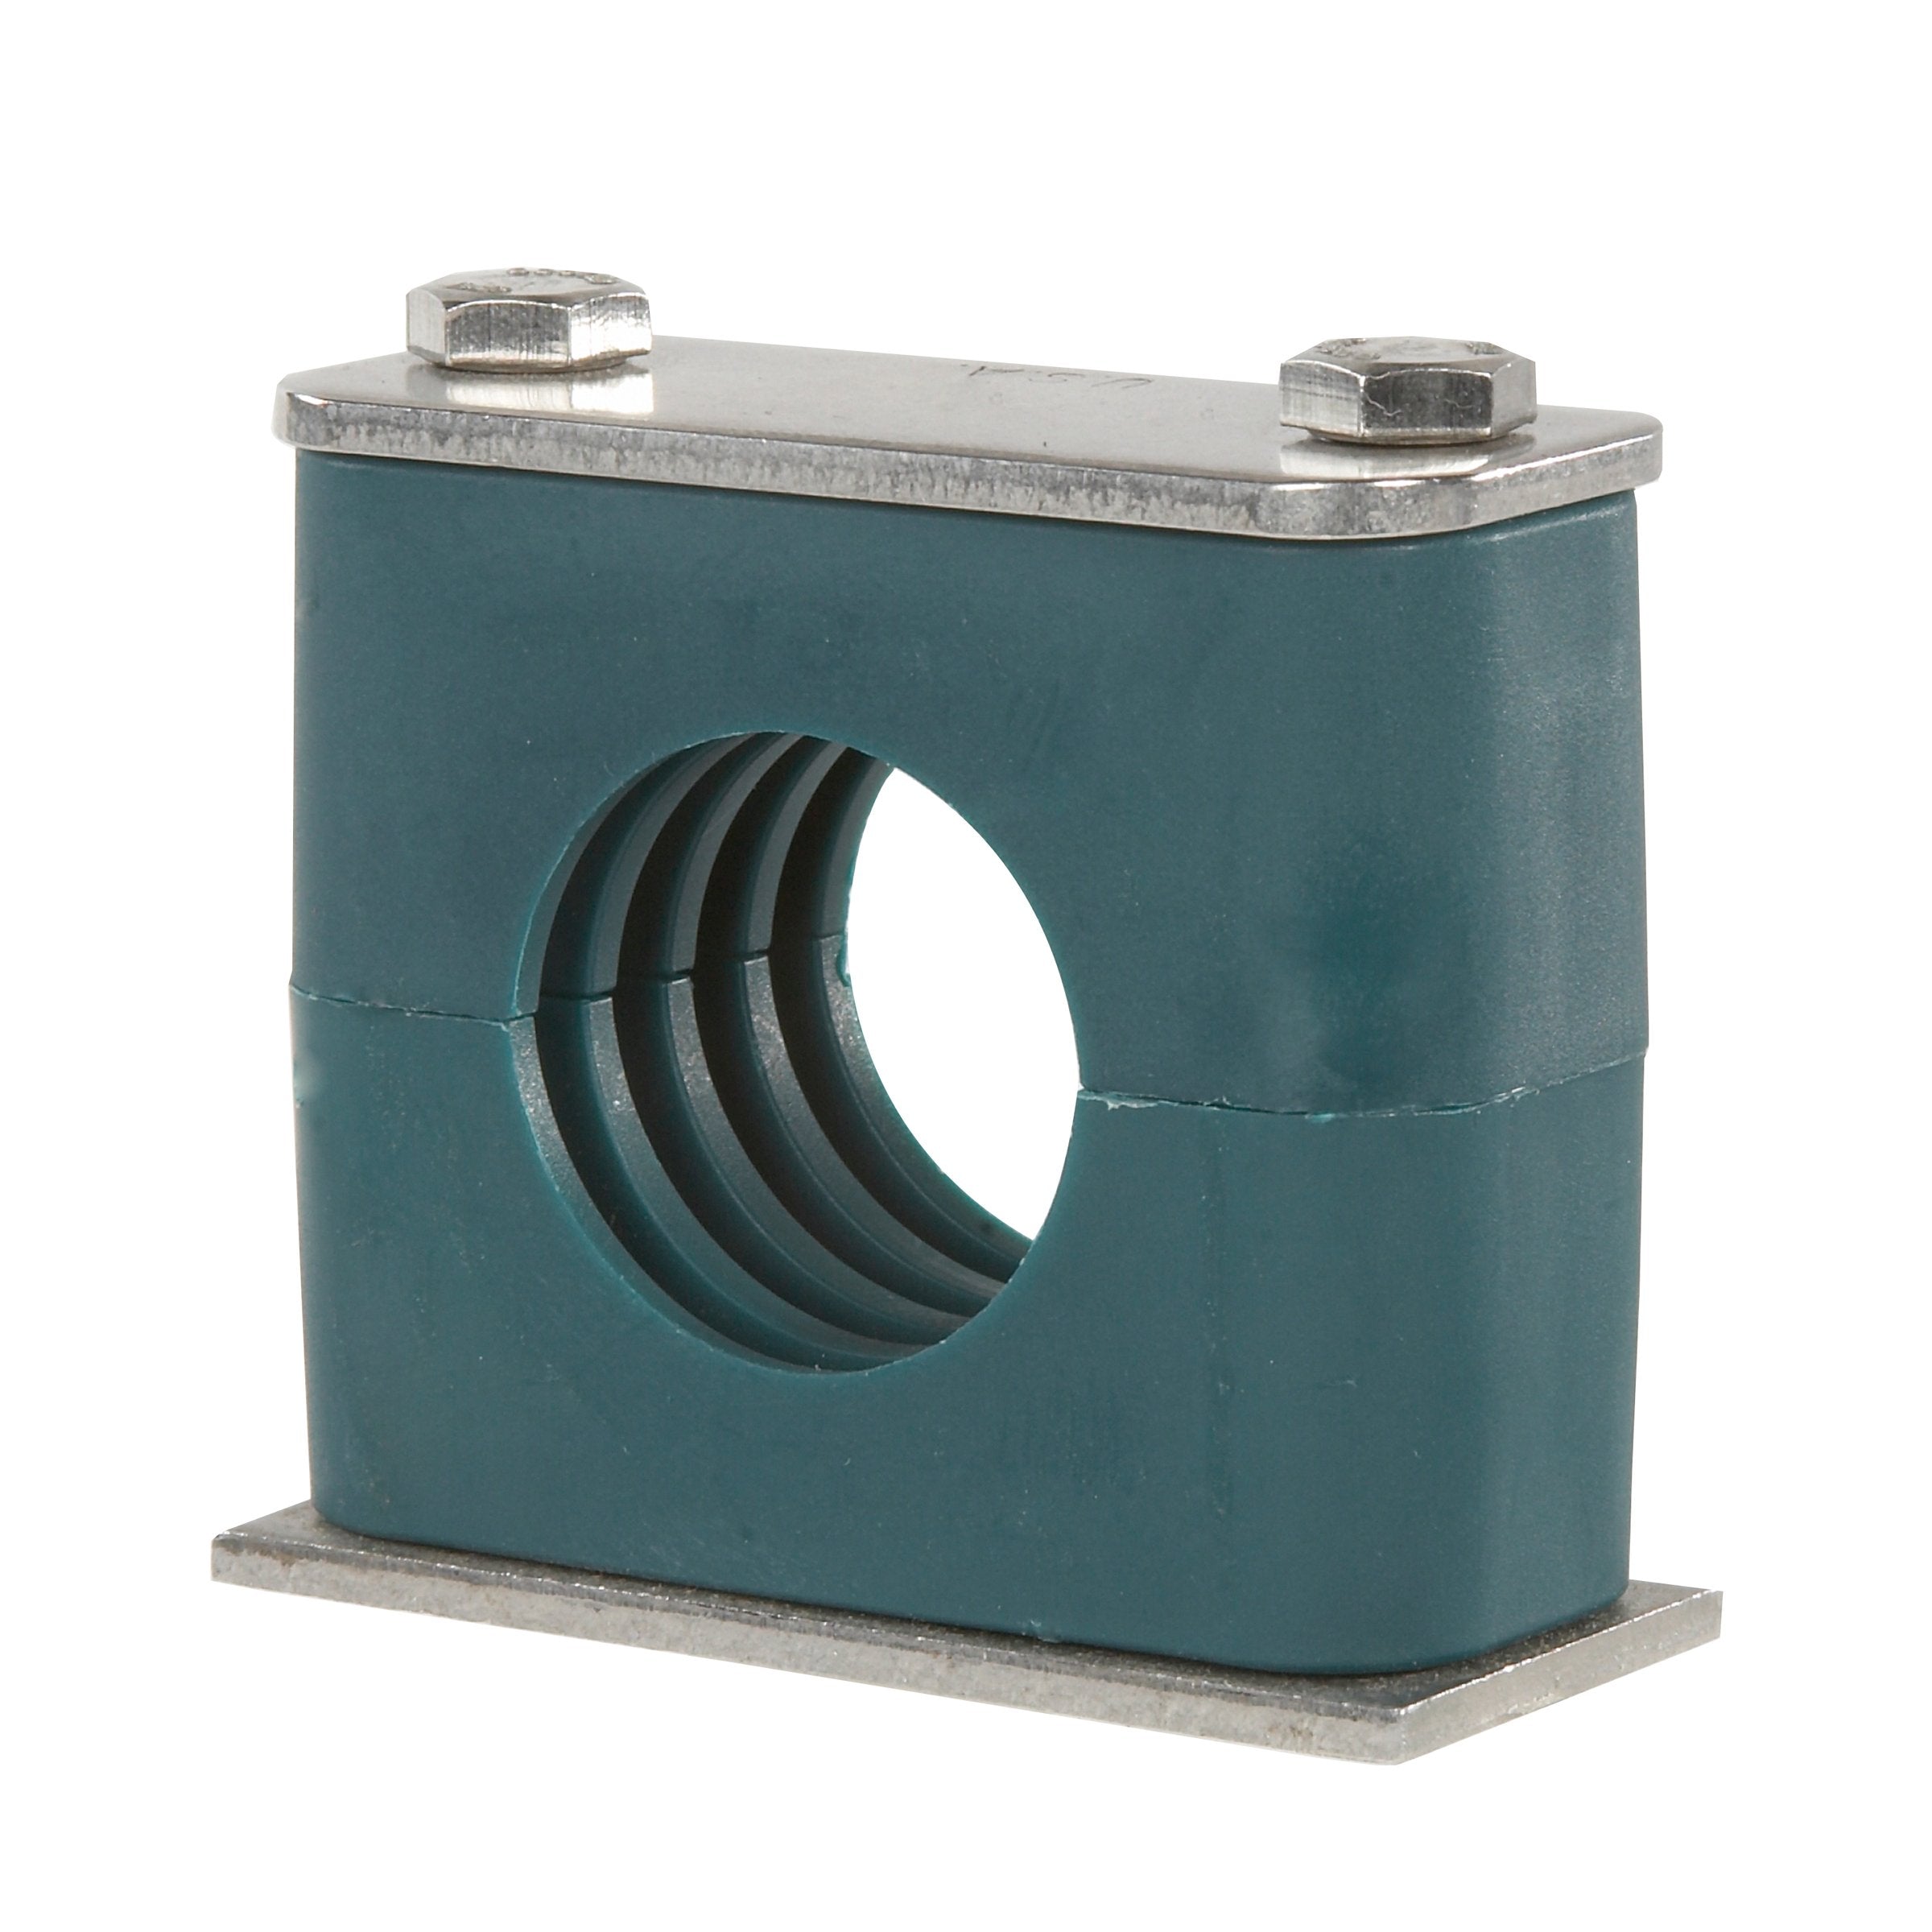 SP-770-PP-DP-AS-U-W10 : Stauff Clamp, Single Weld Plate, 2.75 inch (70mm) OD, for 2.75" Tube, Green PP Insert, Profiled Interior, Carbon Steel